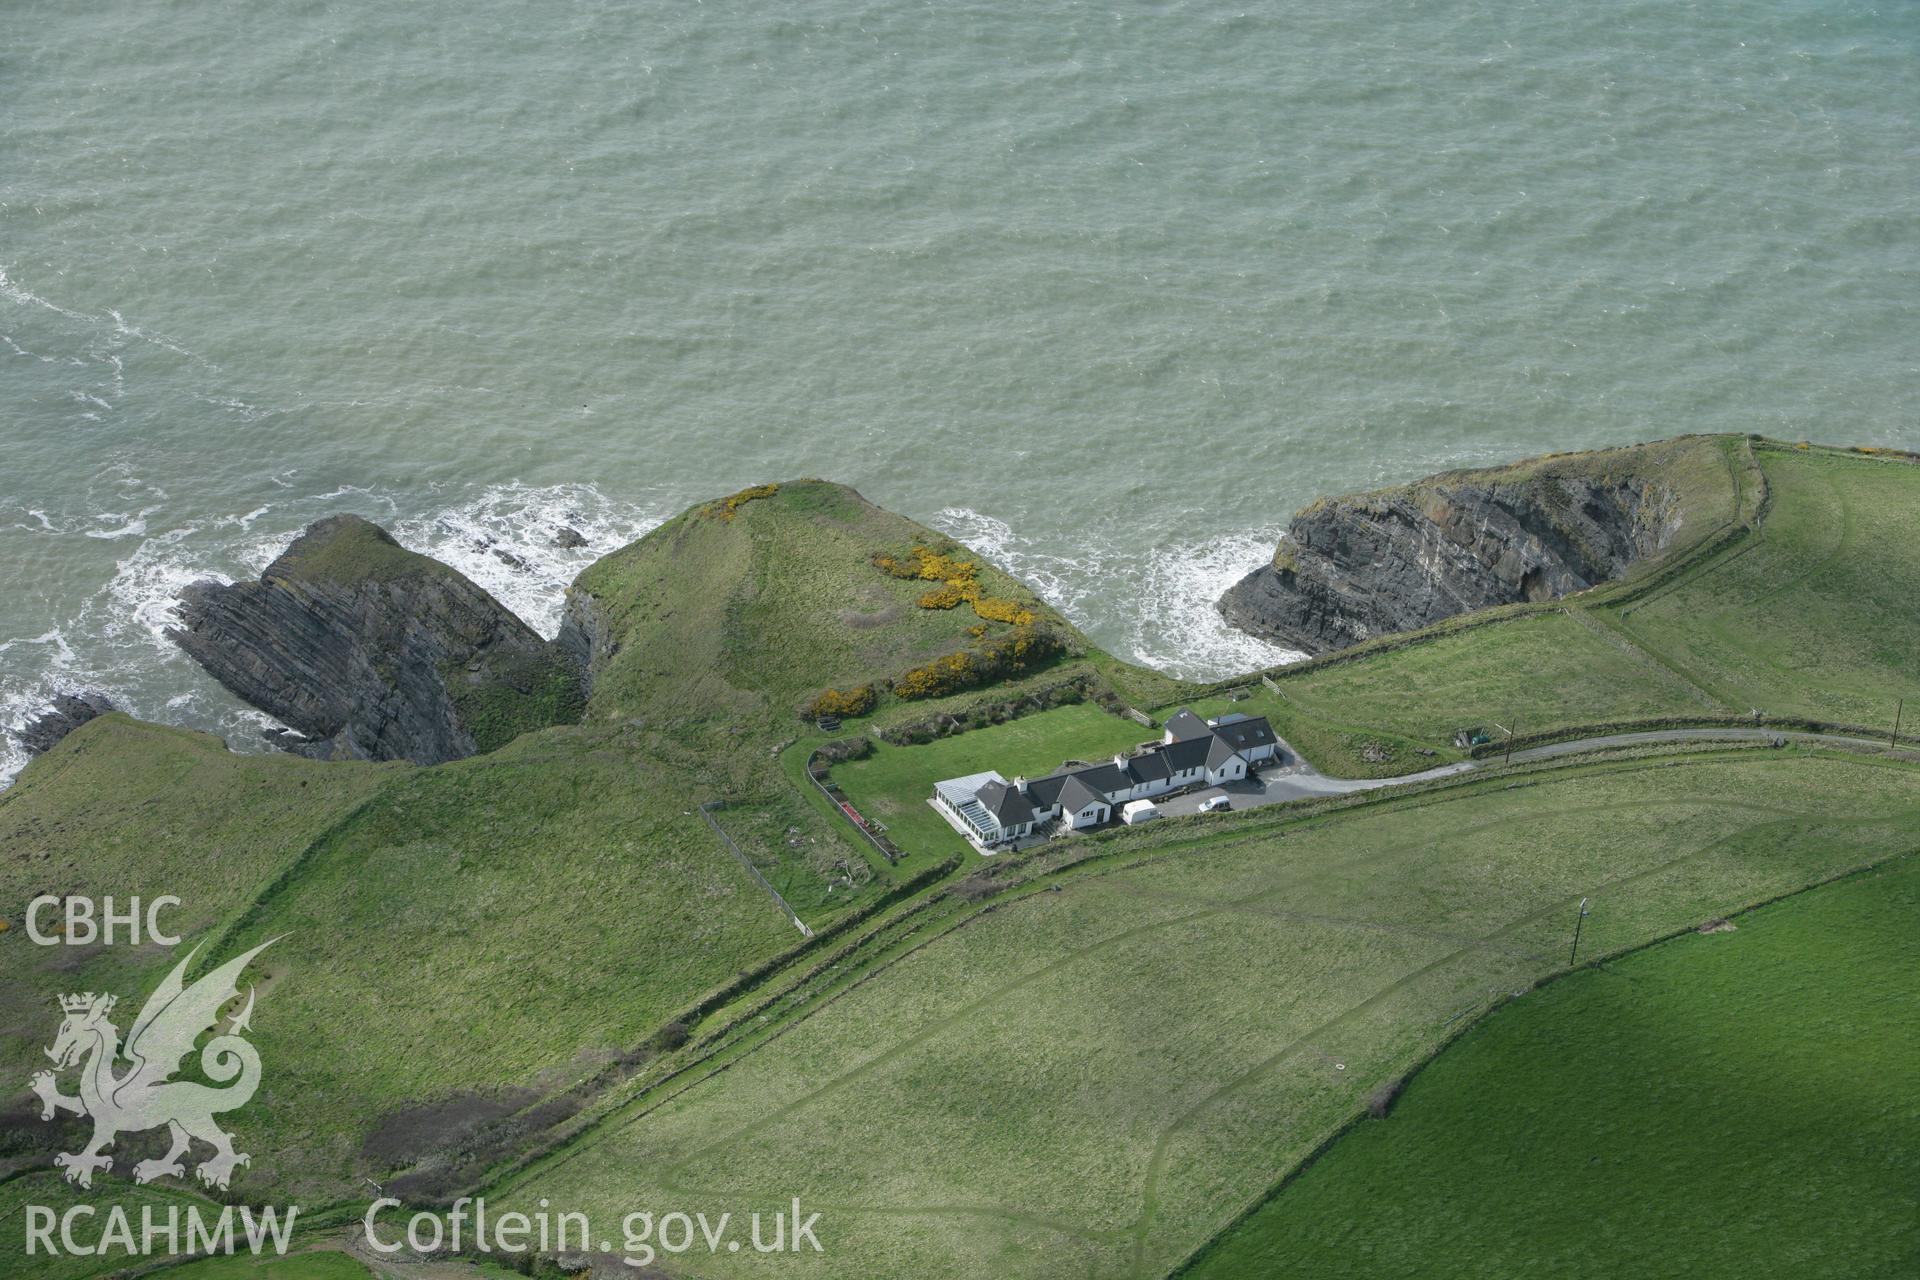 RCAHMW colour oblique photograph of Pen-Castell Promontory Fort. Taken by Toby Driver on 24/04/2008.